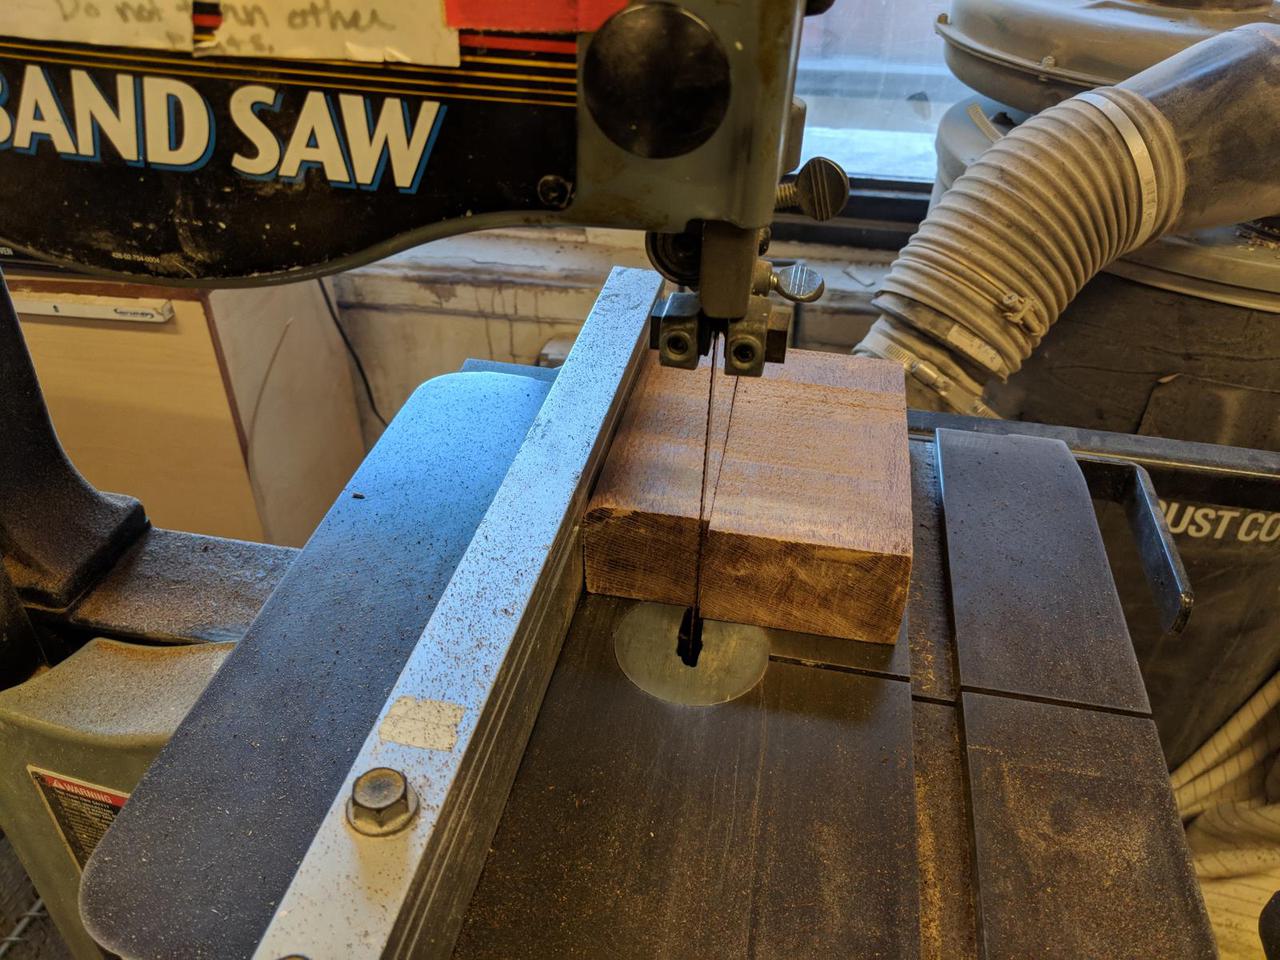 rectangular lacewood block after being cut in half on a band saw.